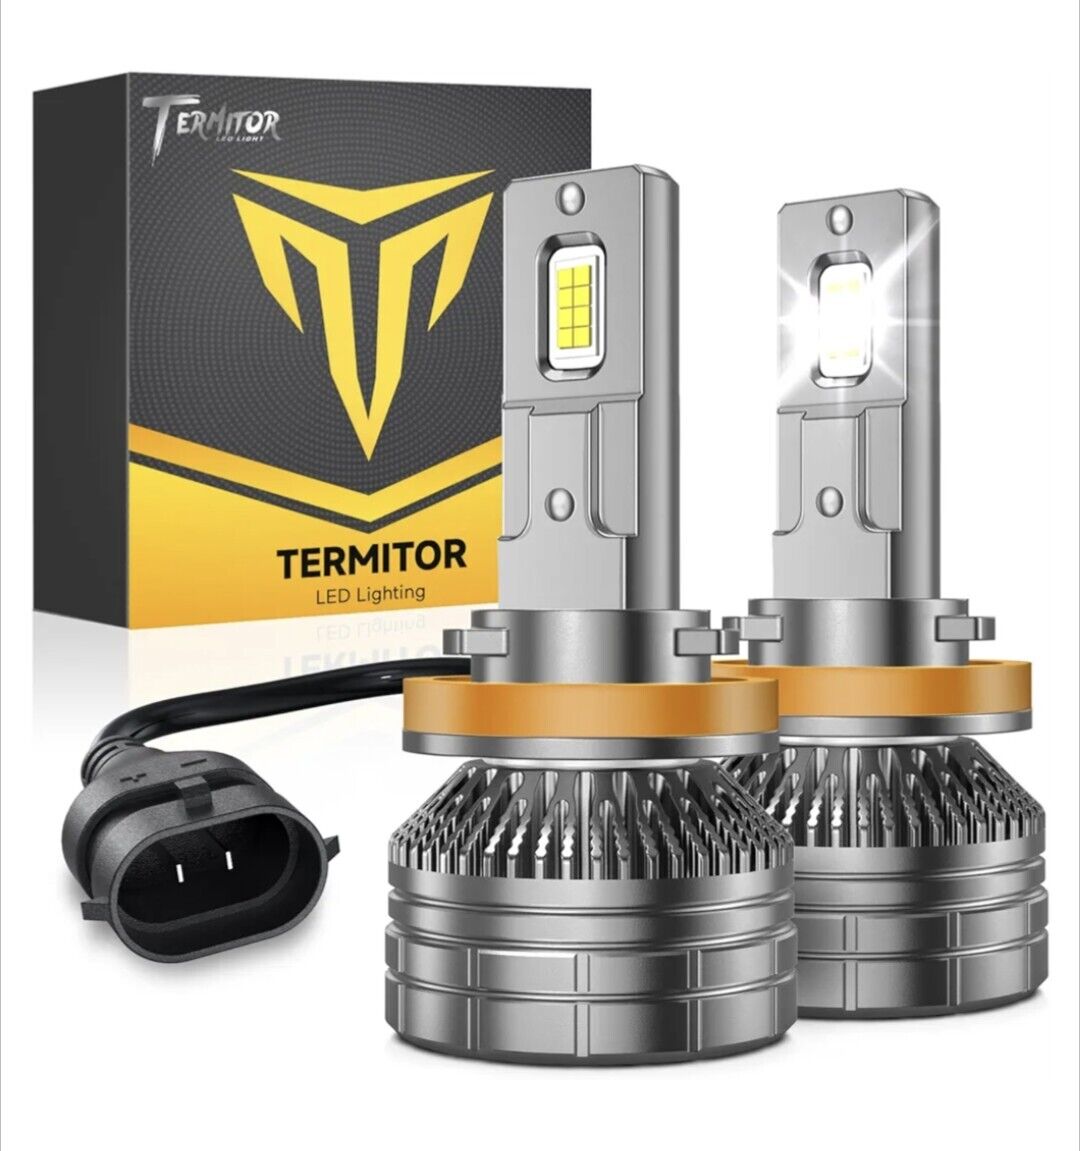 Termitor H11 LED Light Bulbs 60W 24000LM 6500K Cool White 600% Bright Pair